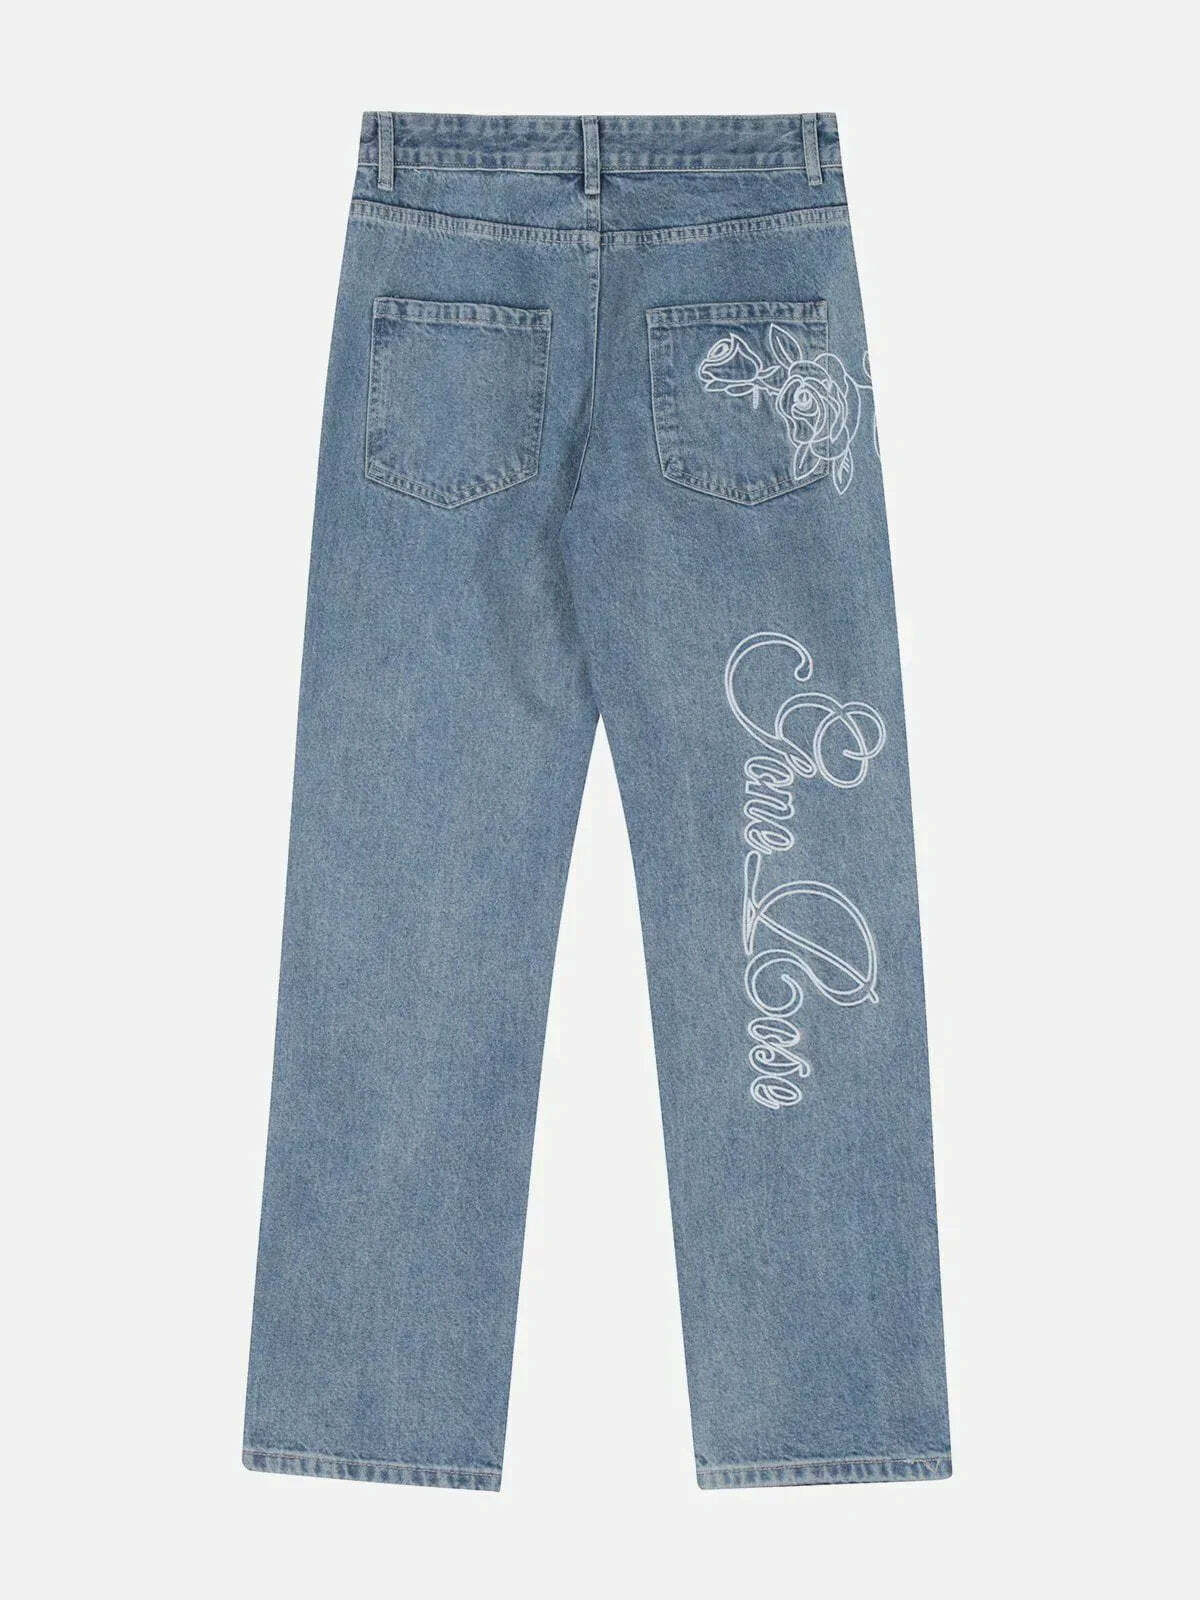 embroidered rose jeans edgy & vibrant streetwear 6085